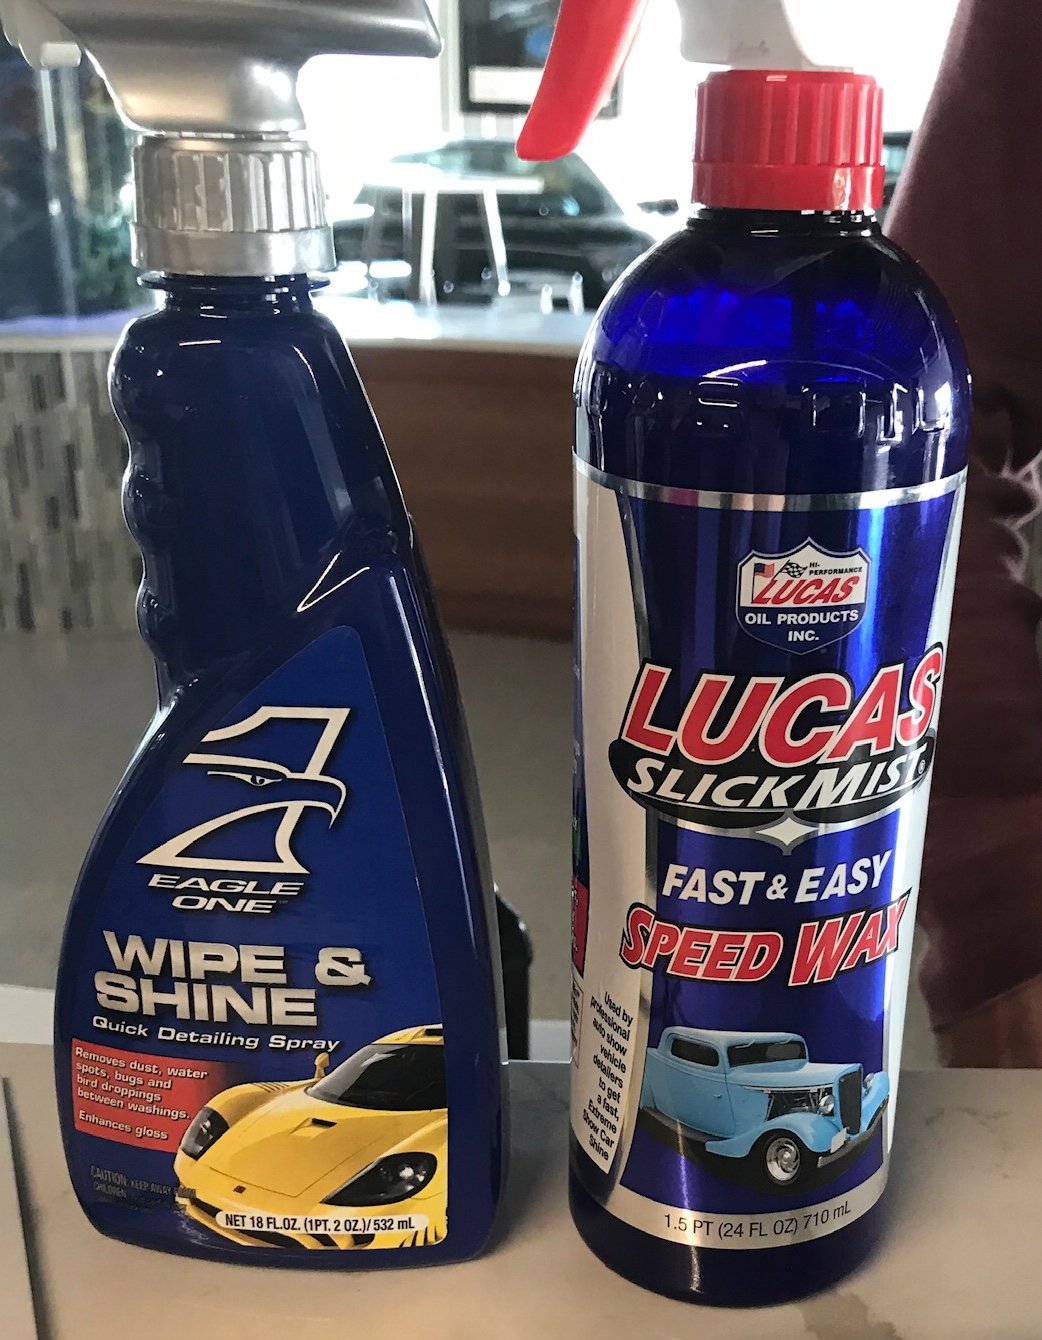 We use Lucas Slick Mist Speed Wax exclusively with an auto detail